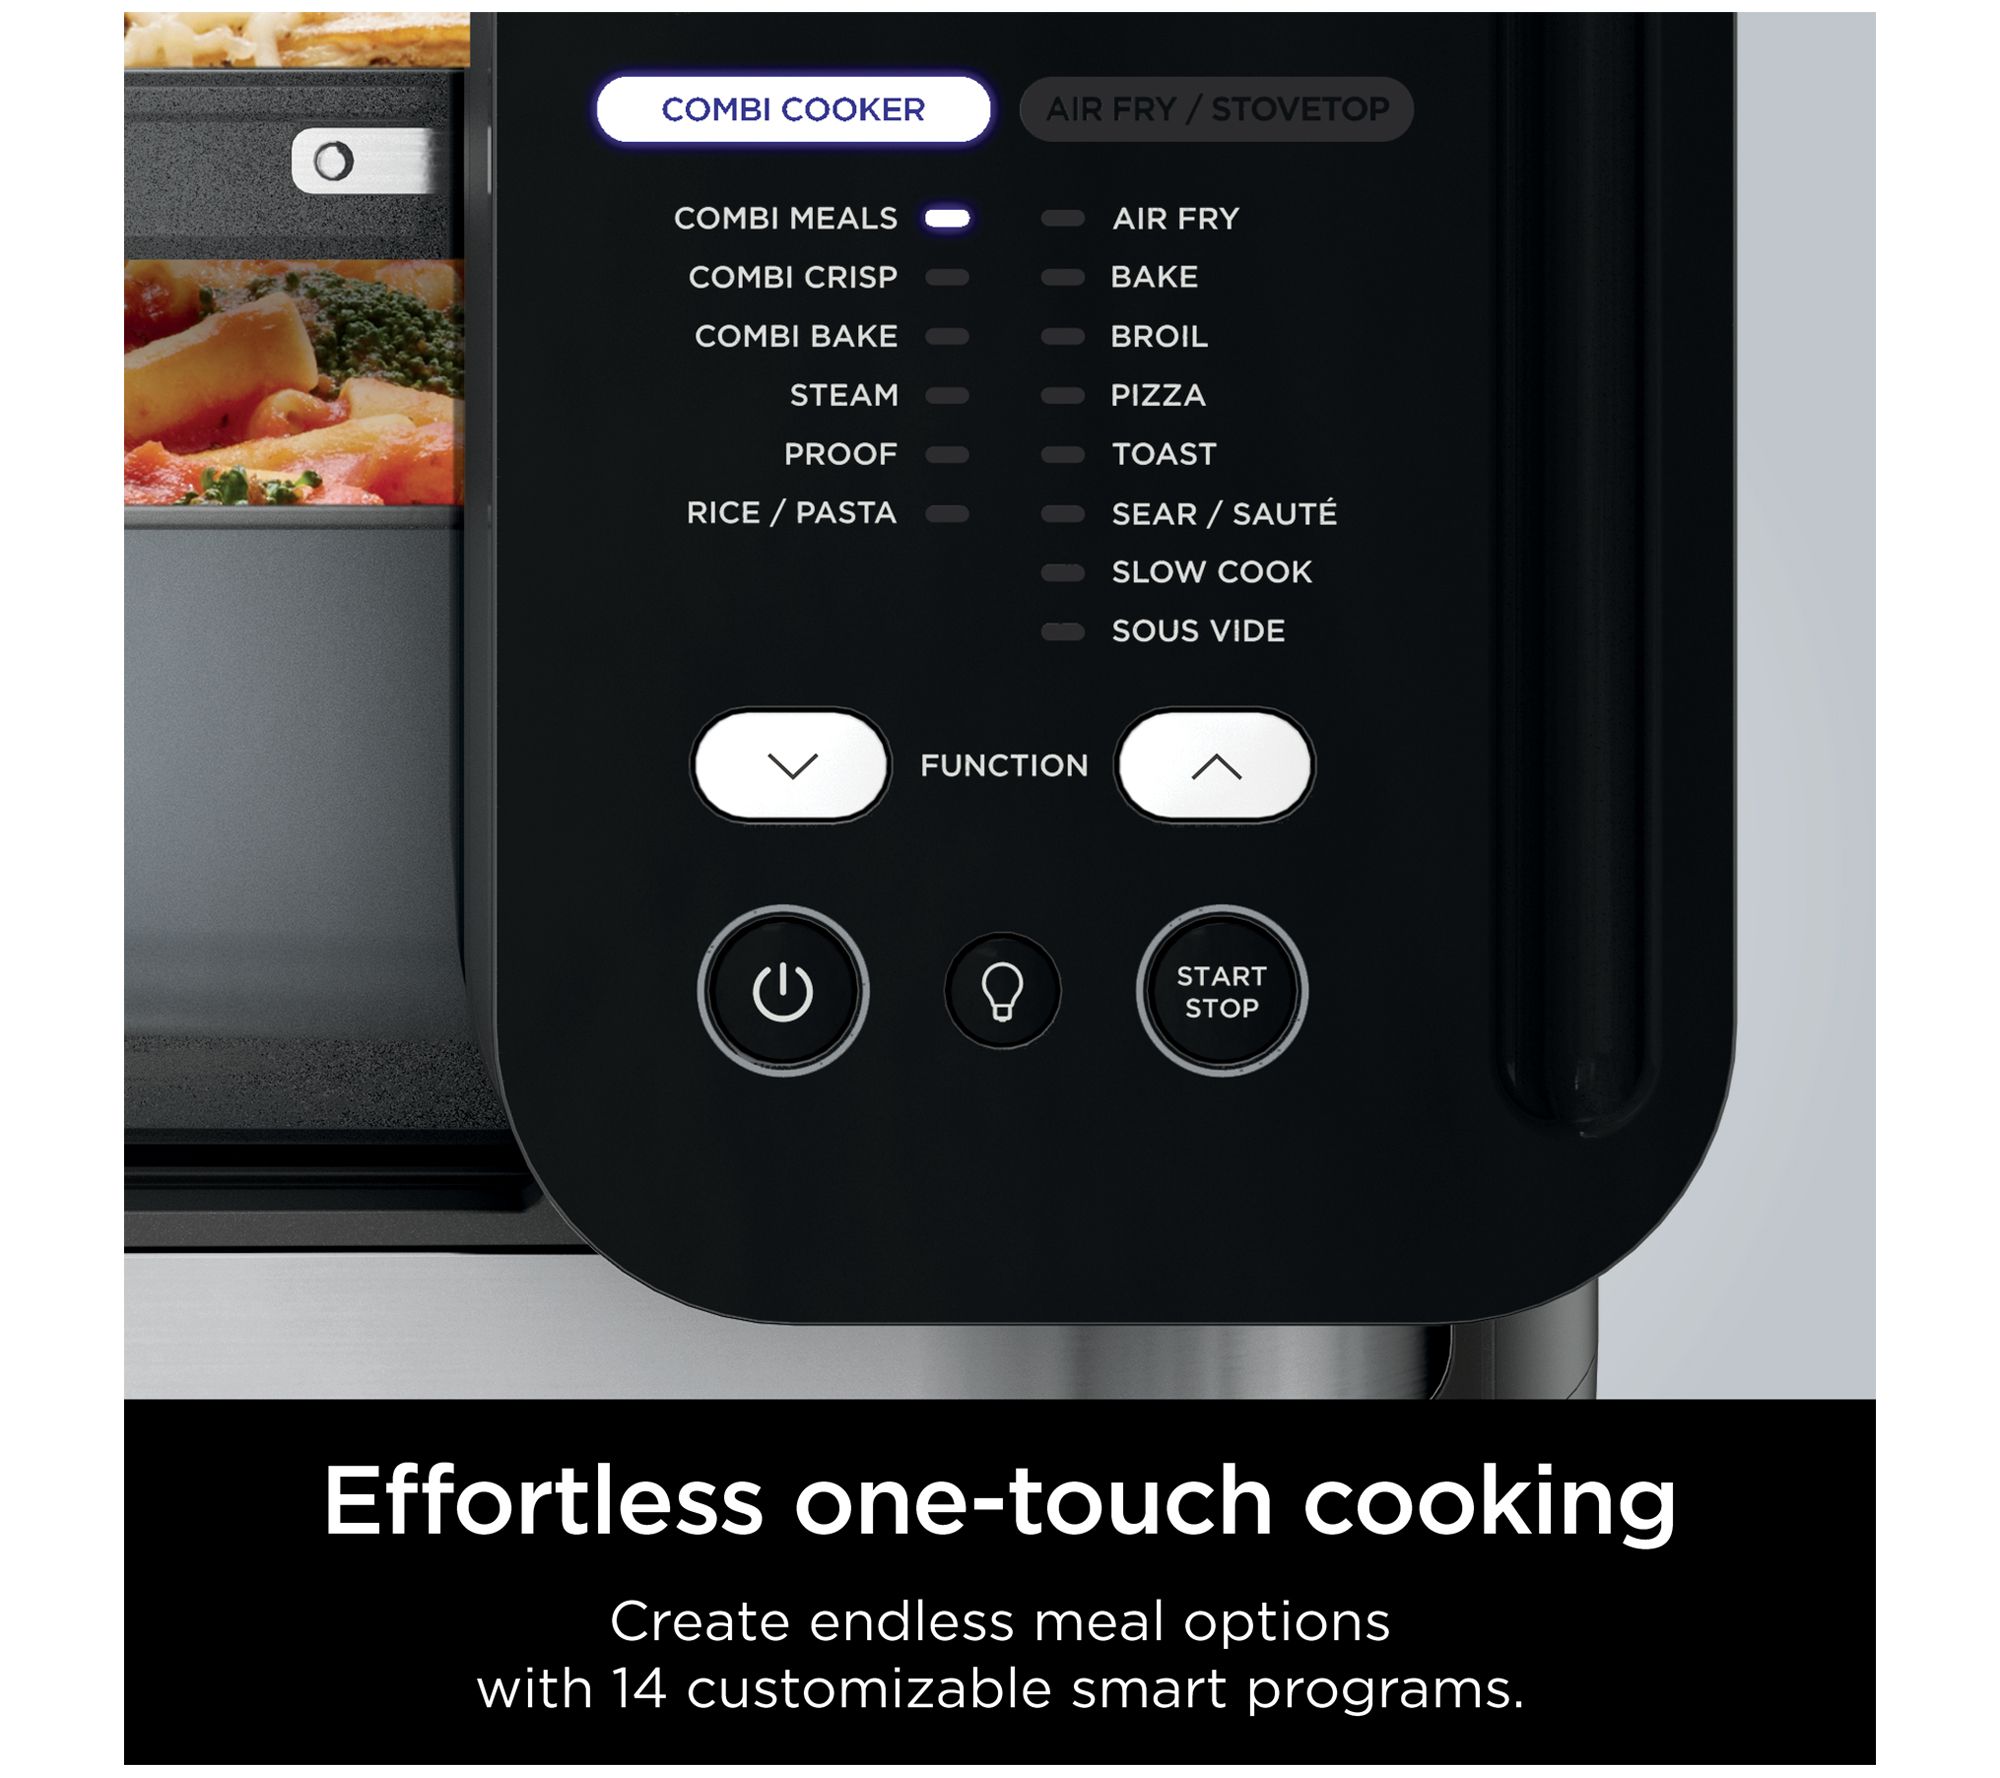 Ninja Combi All-In-One Multicooker, Oven & Air Fryer with Recipe Guide -  21891419